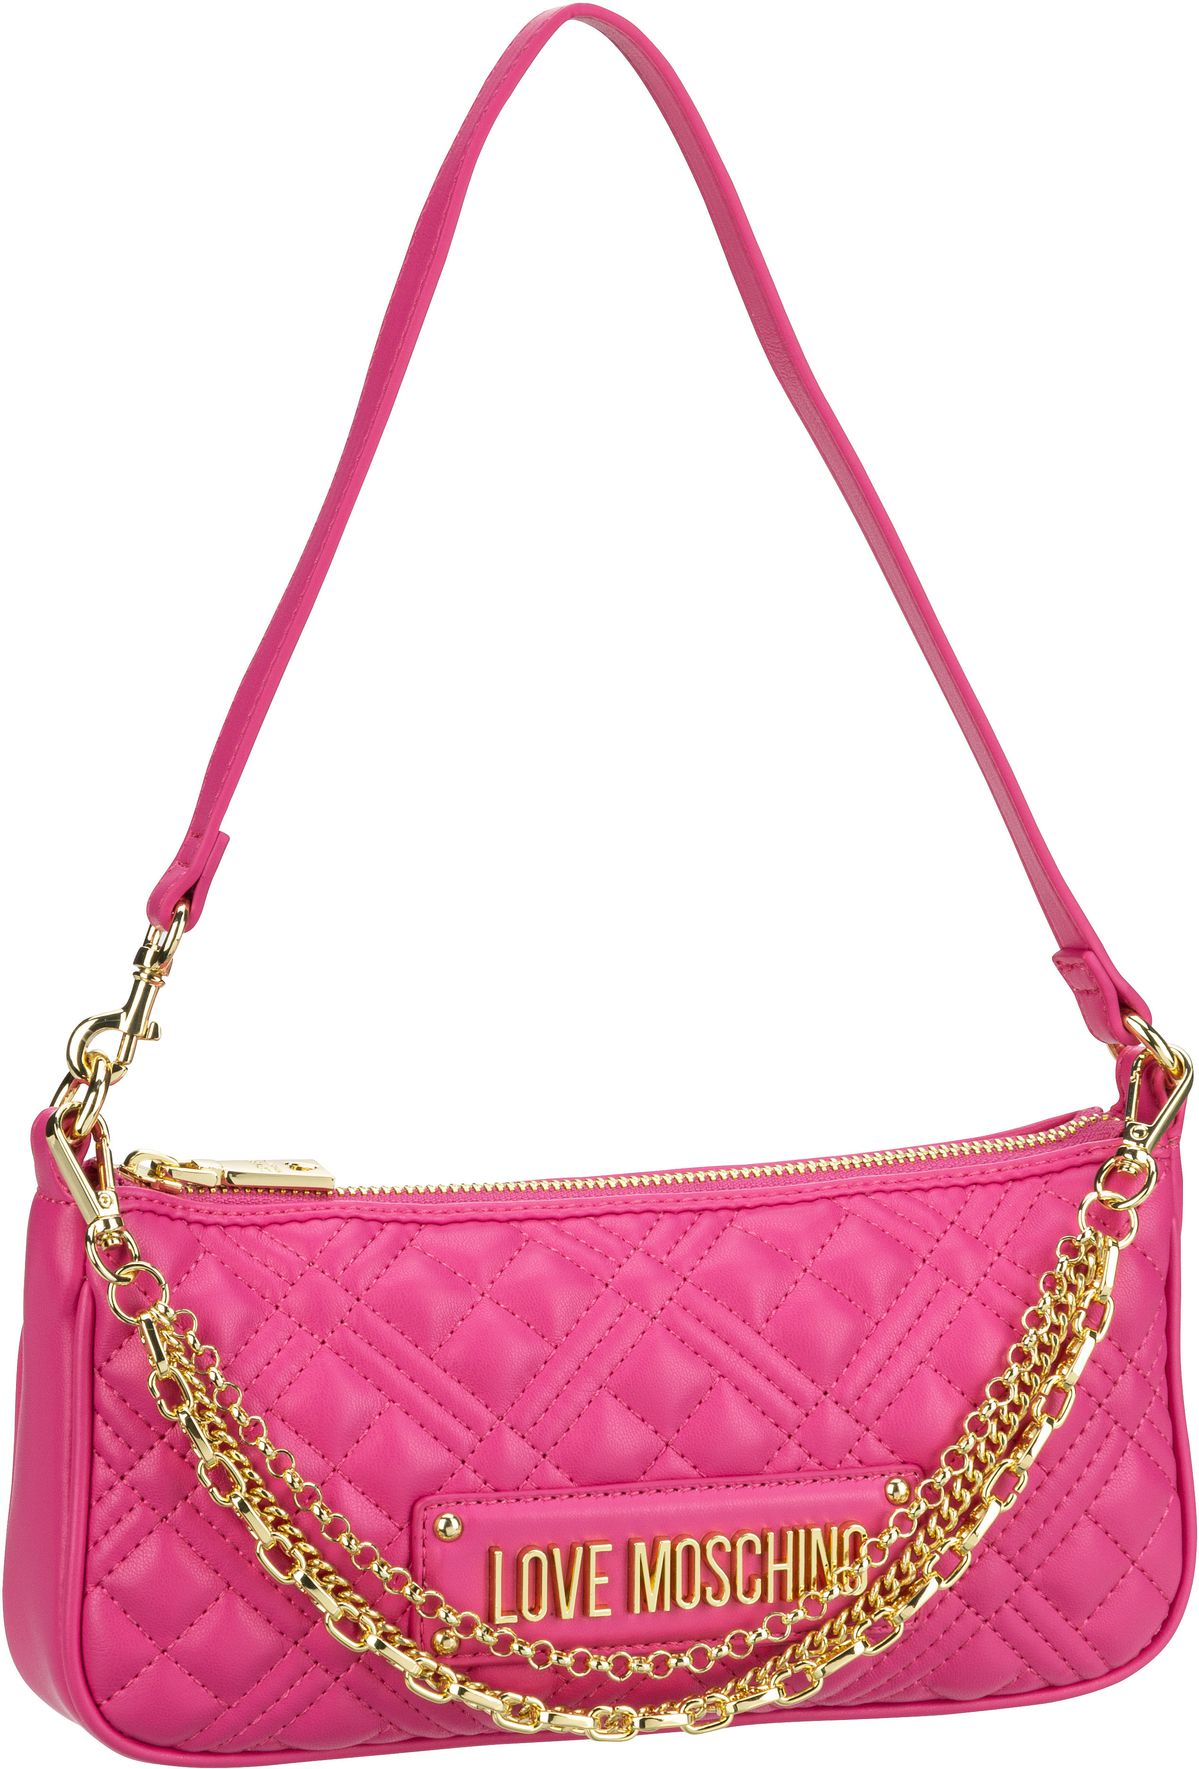 Love Moschino Multi Chain Quilted Small Shoulder Bag 4258 - Fuchsia